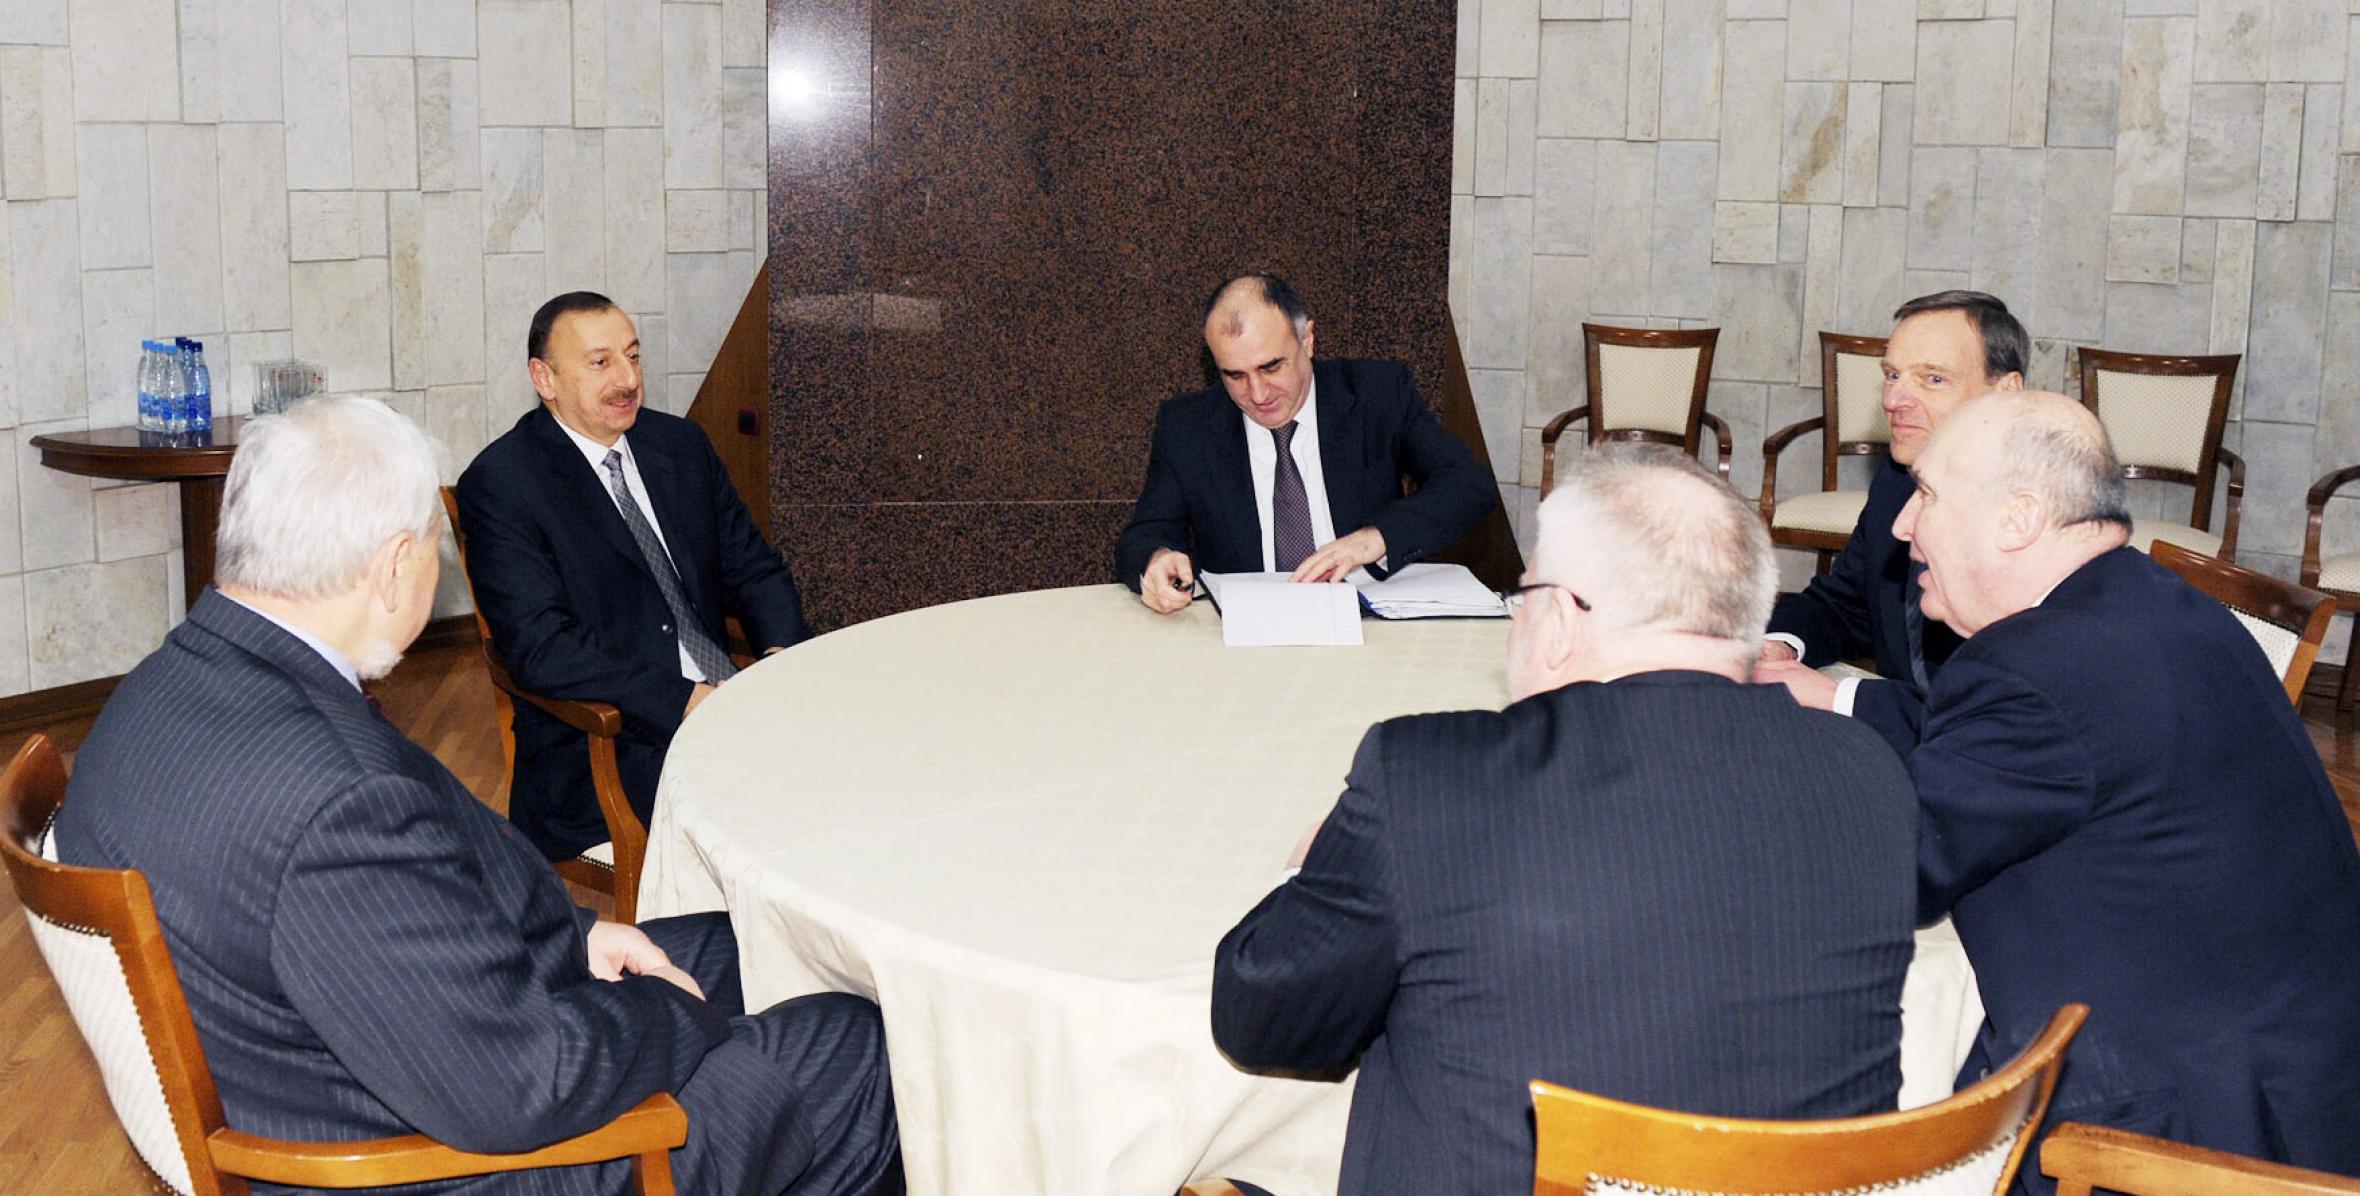 Ilham Aliyev met with the OSCE Co-Chairmen